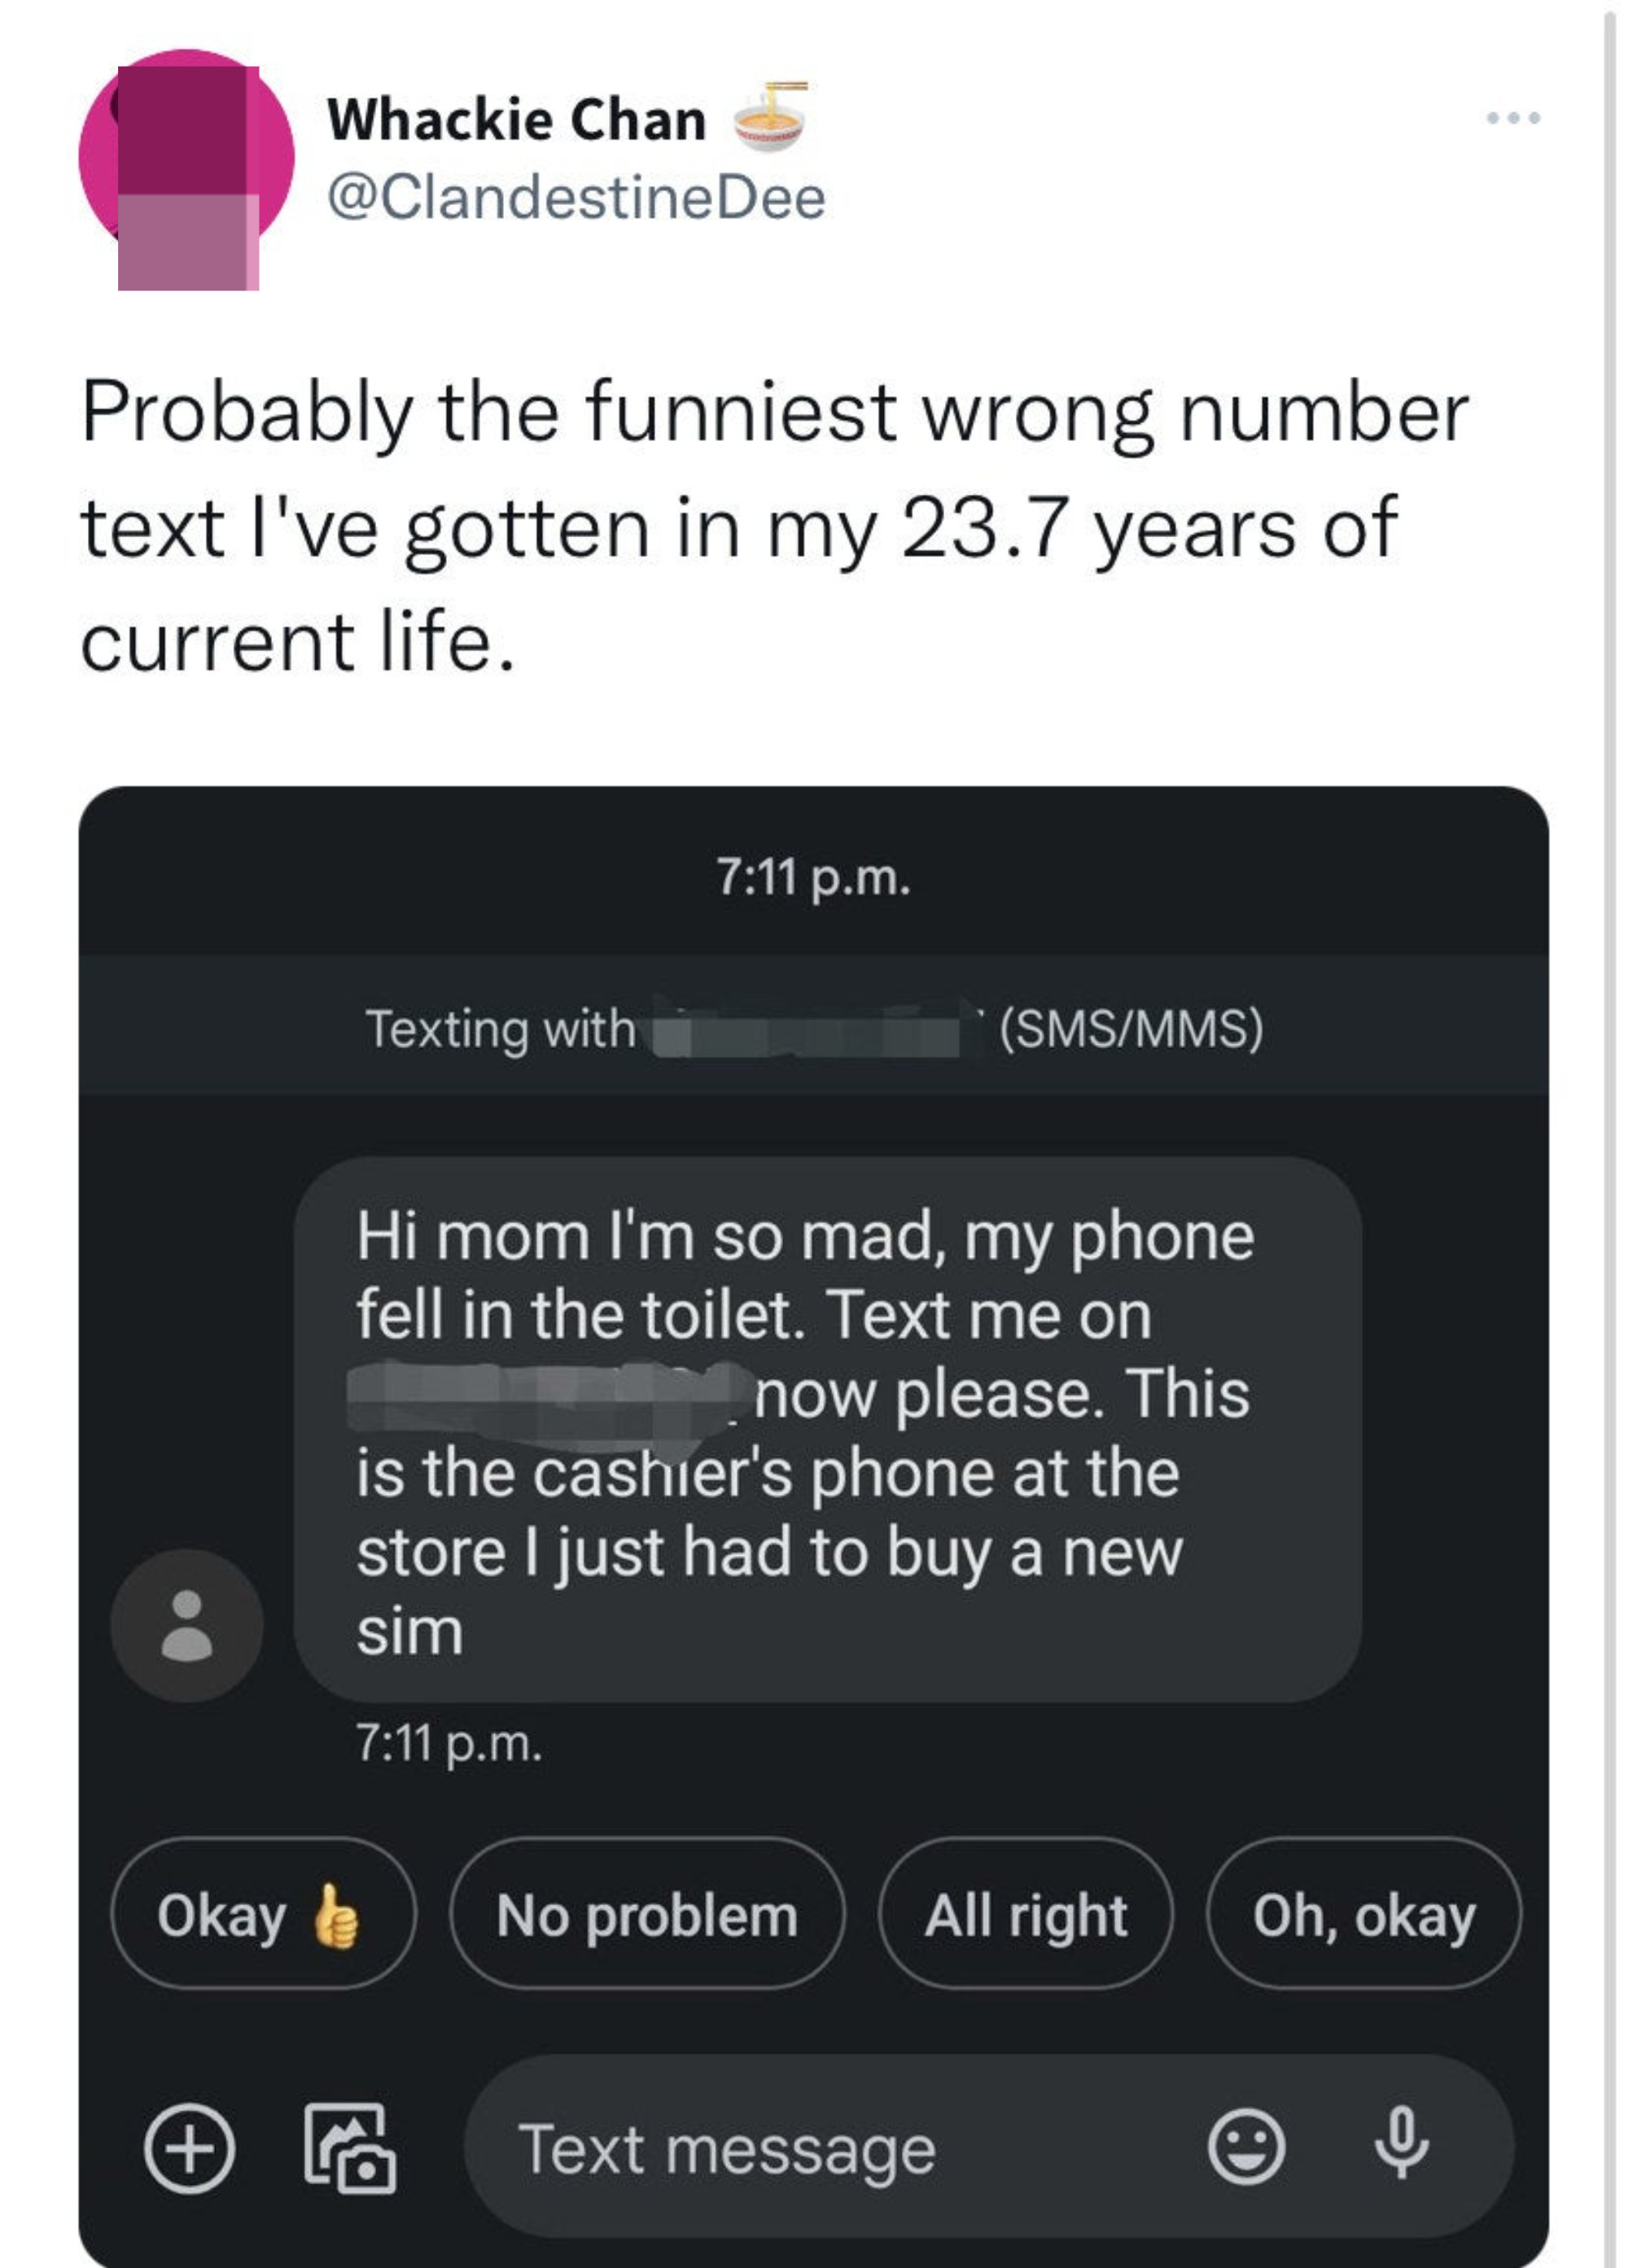 Person gets a wrong number text to &quot;Mom&quot; saying their phone fell in the toilet and they&#x27;re using the cashier&#x27;s phone at the store, they had to buy a new sim